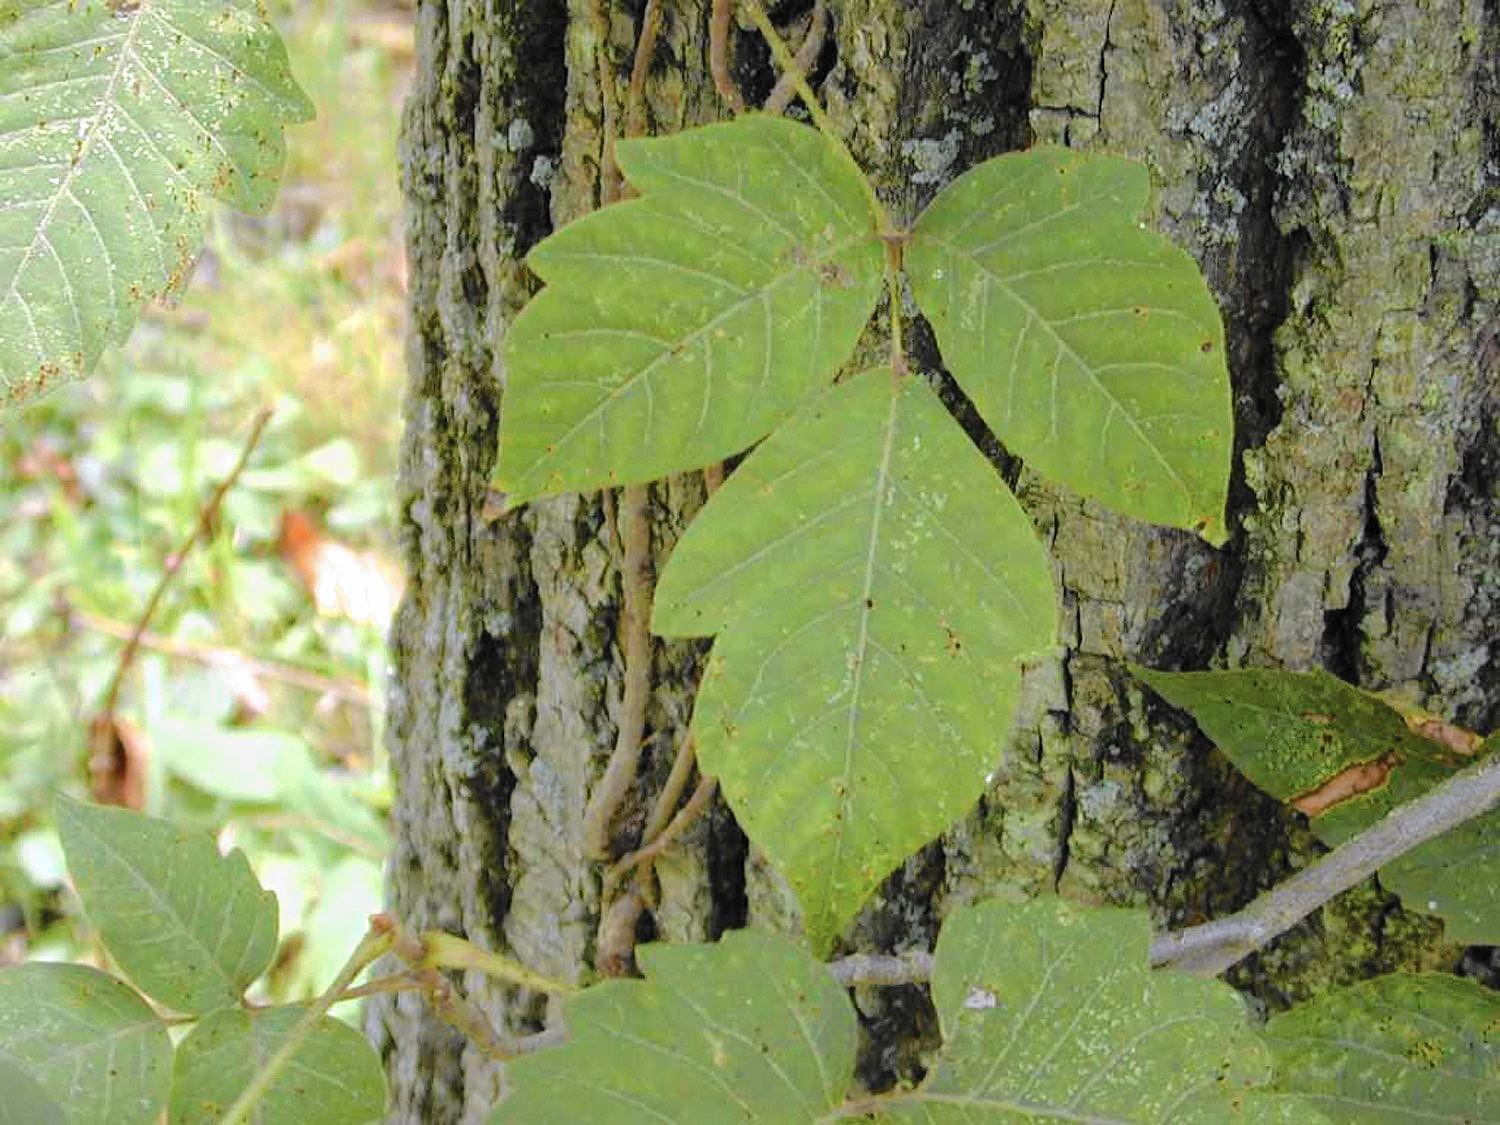 How to remove poison ivy from your yard safely - Chicago Tribune